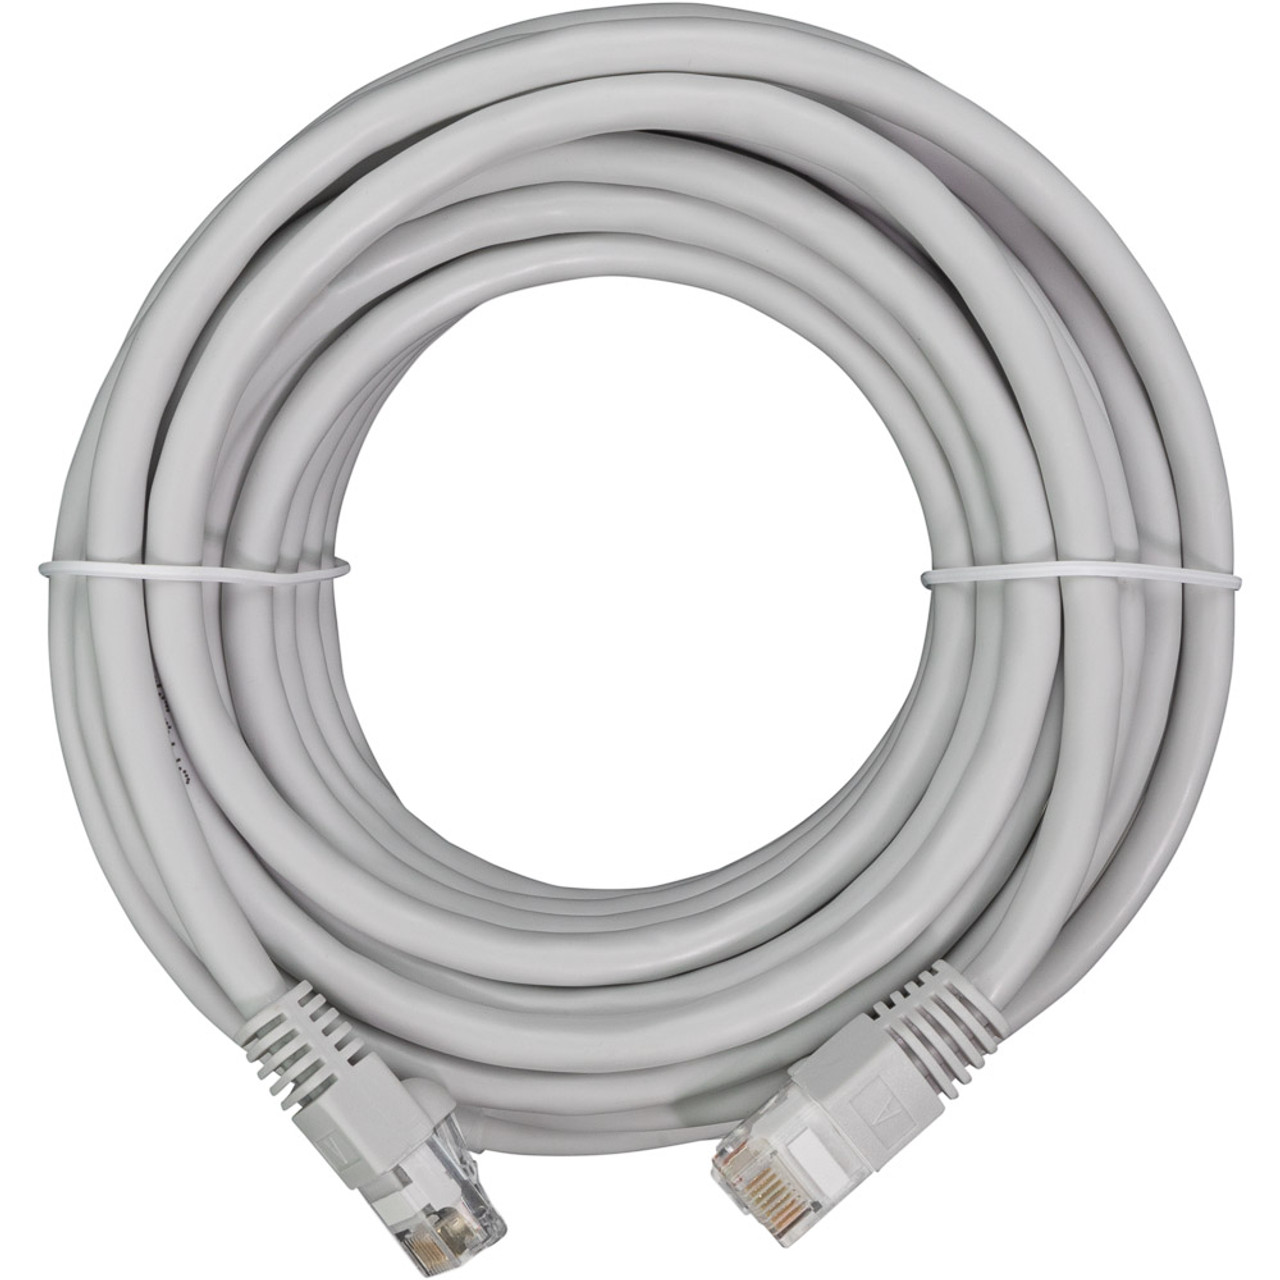 NavePoint Cat6 UTP Ethernet Network Patch Cable - 25 Ft. Gray